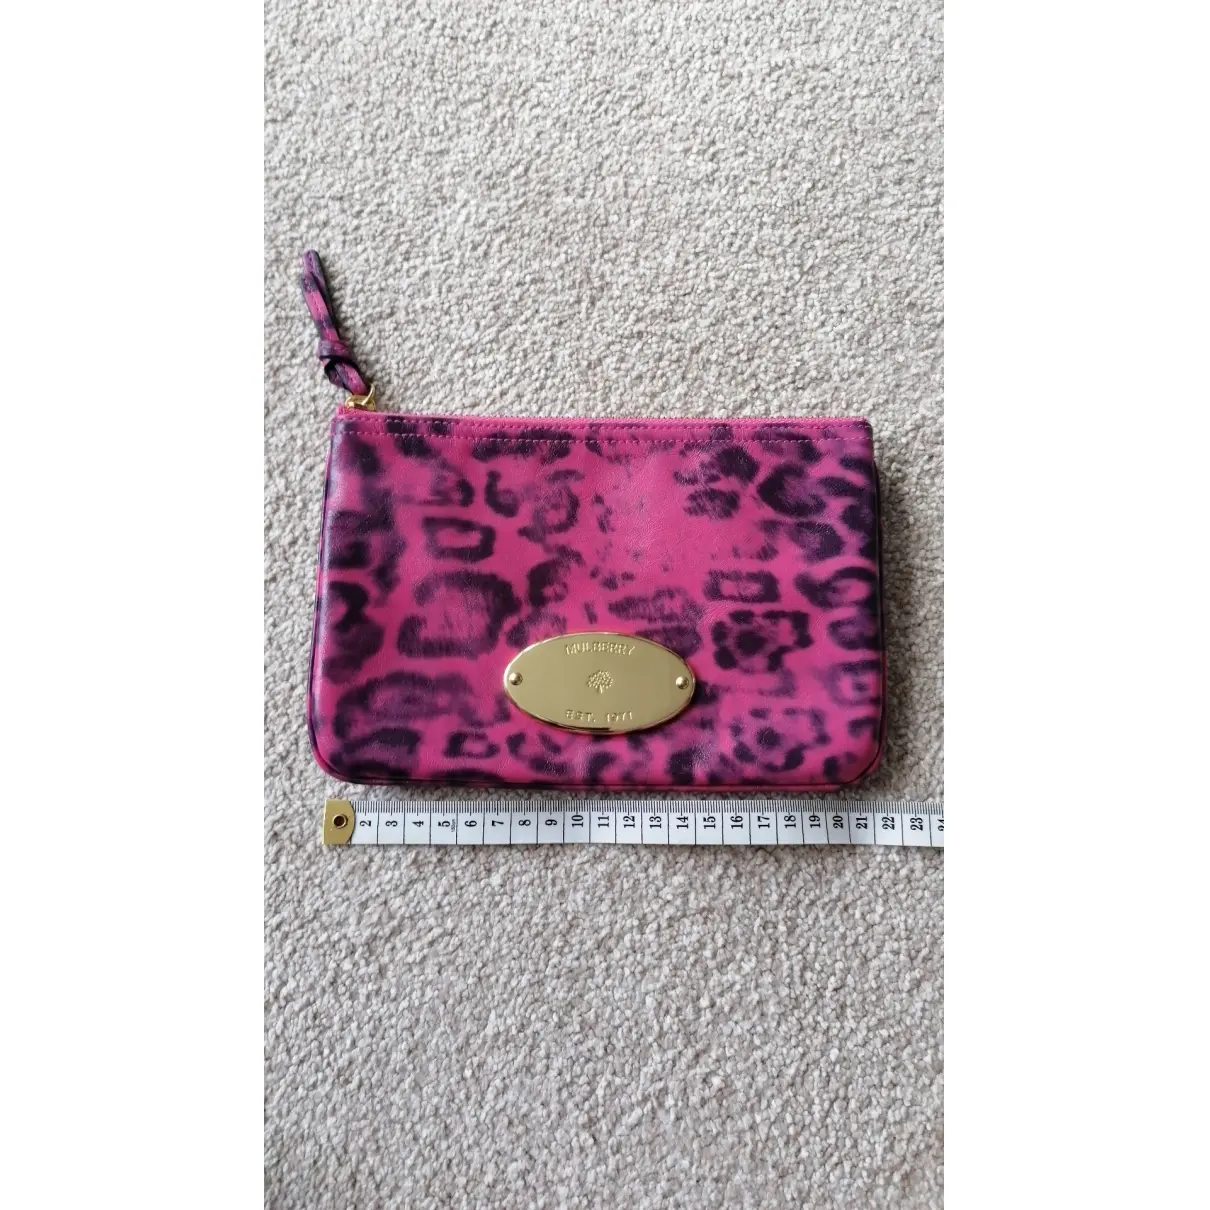 Leather clutch bag Mulberry